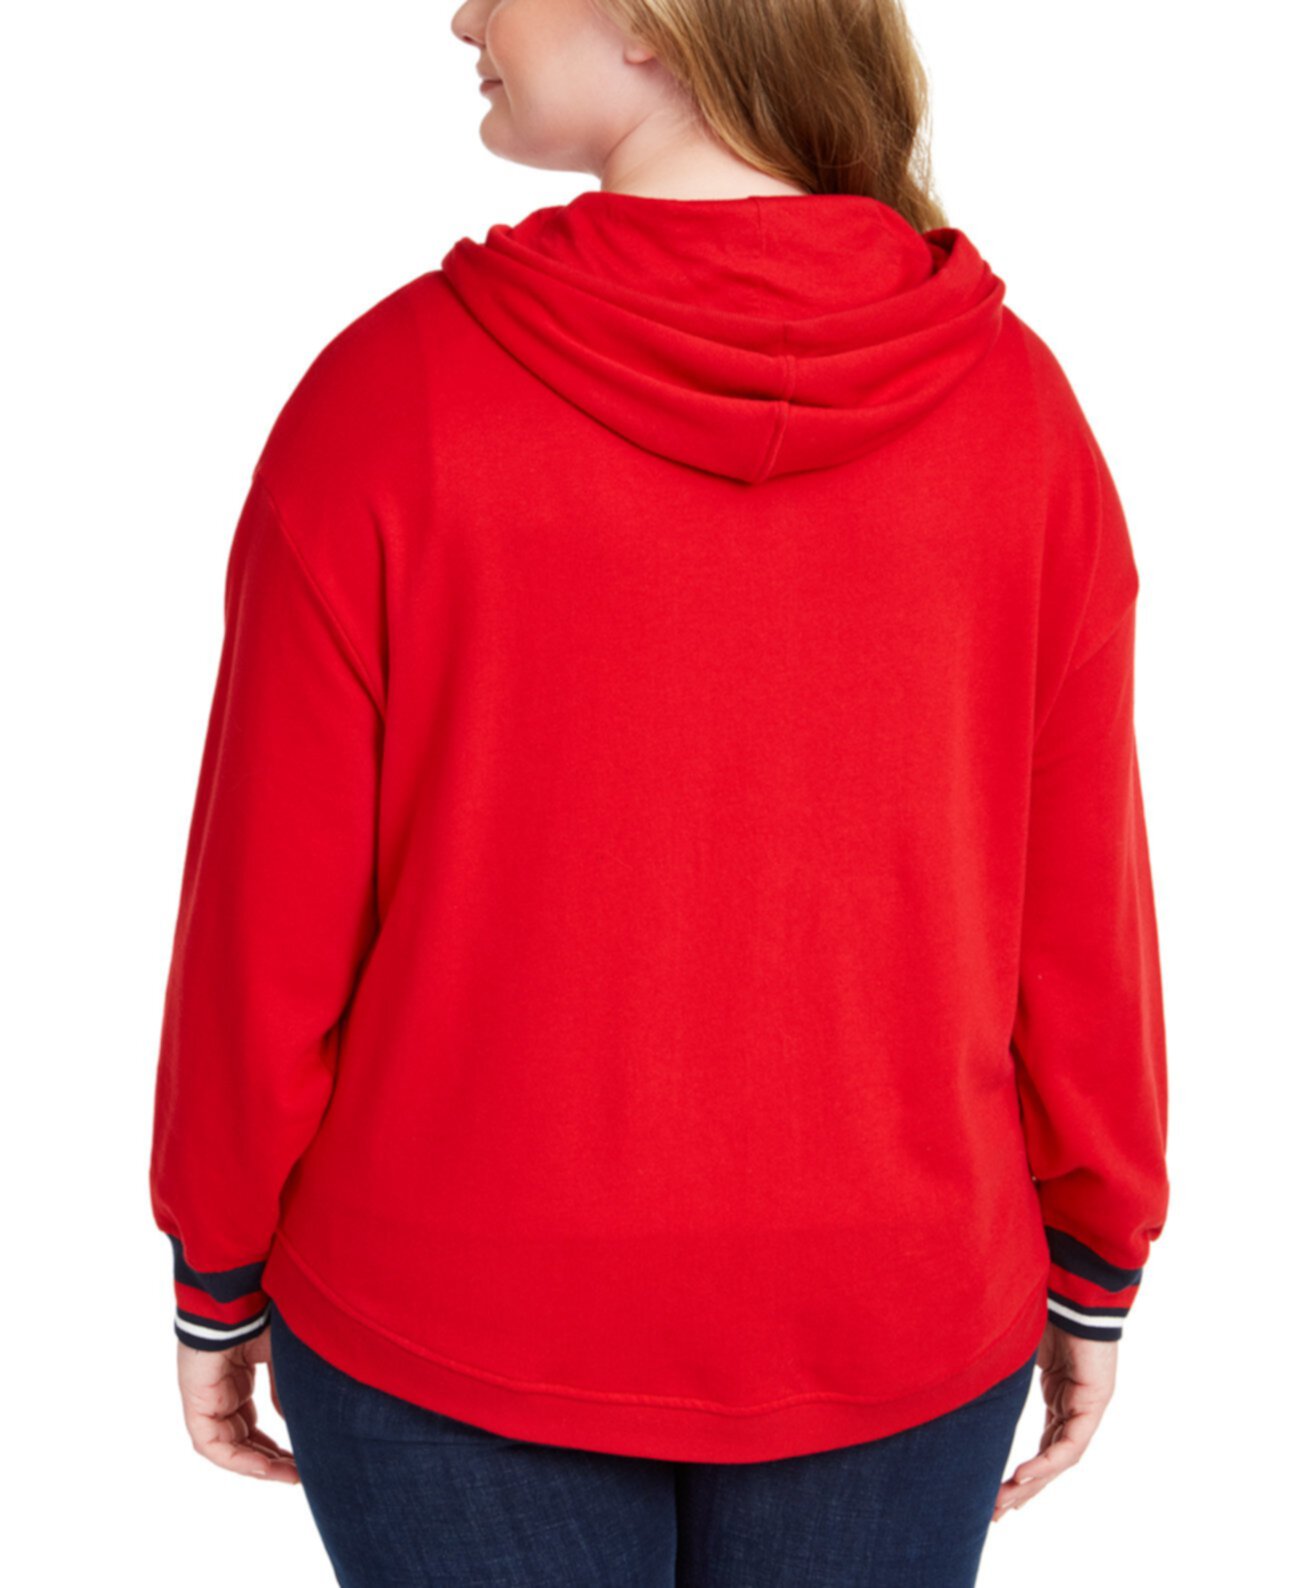 Plus Size Flag Colorblocked Zip-Front Hooded Sweatshirt Tommy Hilfiger